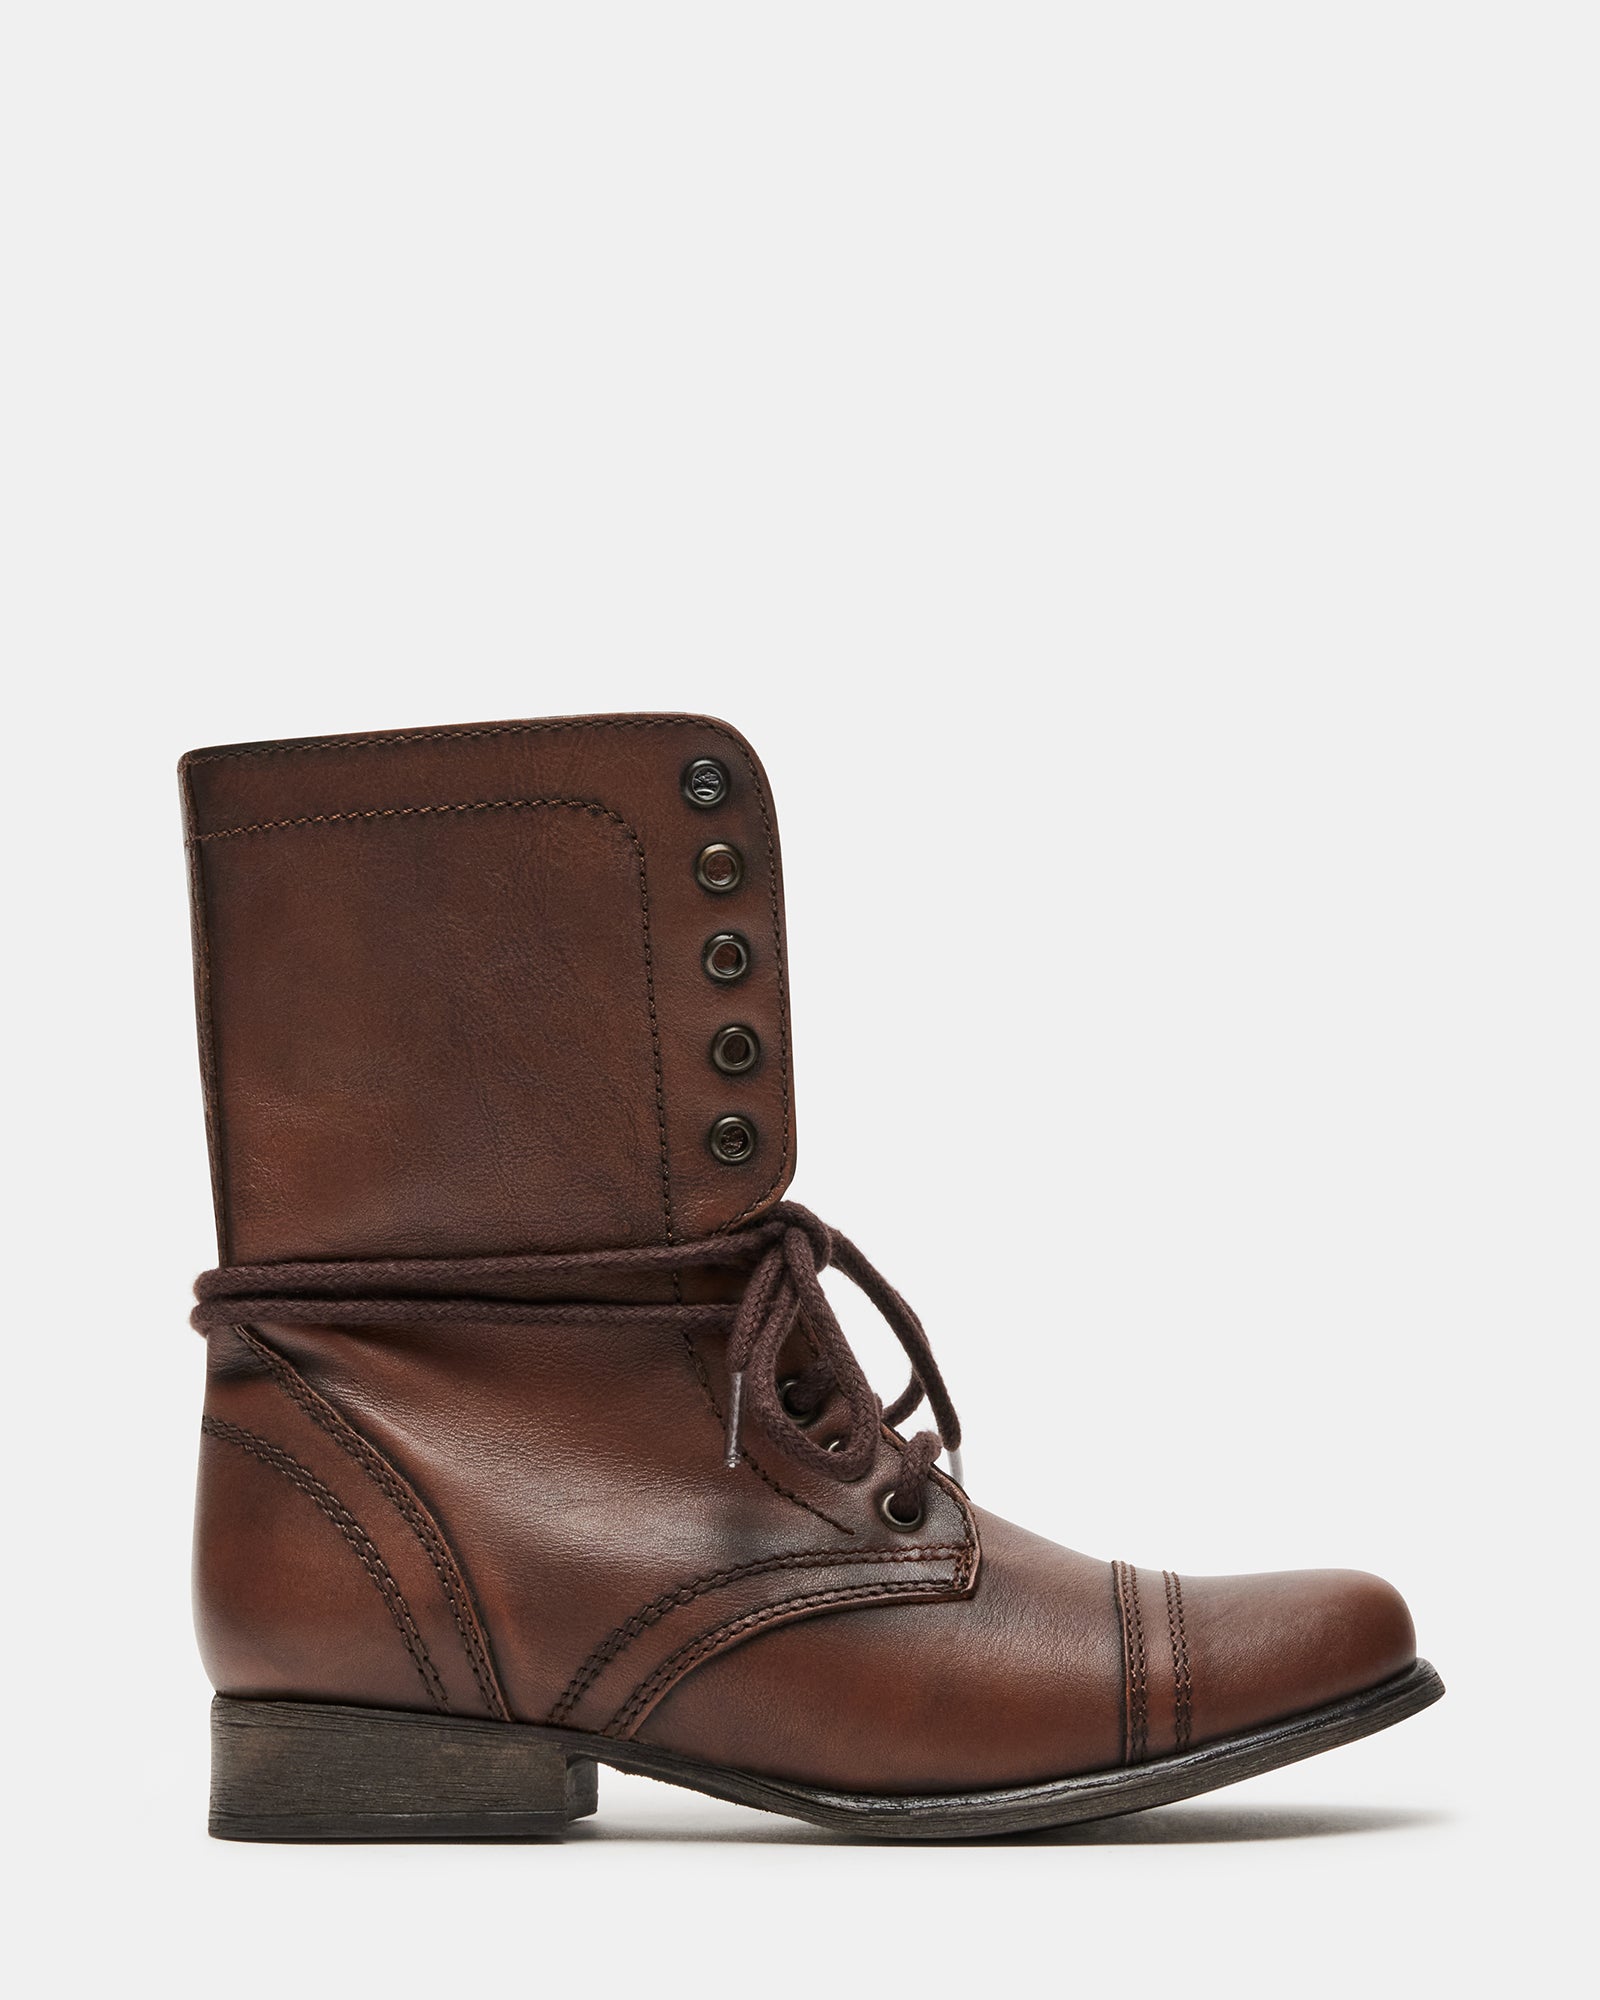 TROOPA Brown Leather Combat Boots | Women's Leather Combat Boots